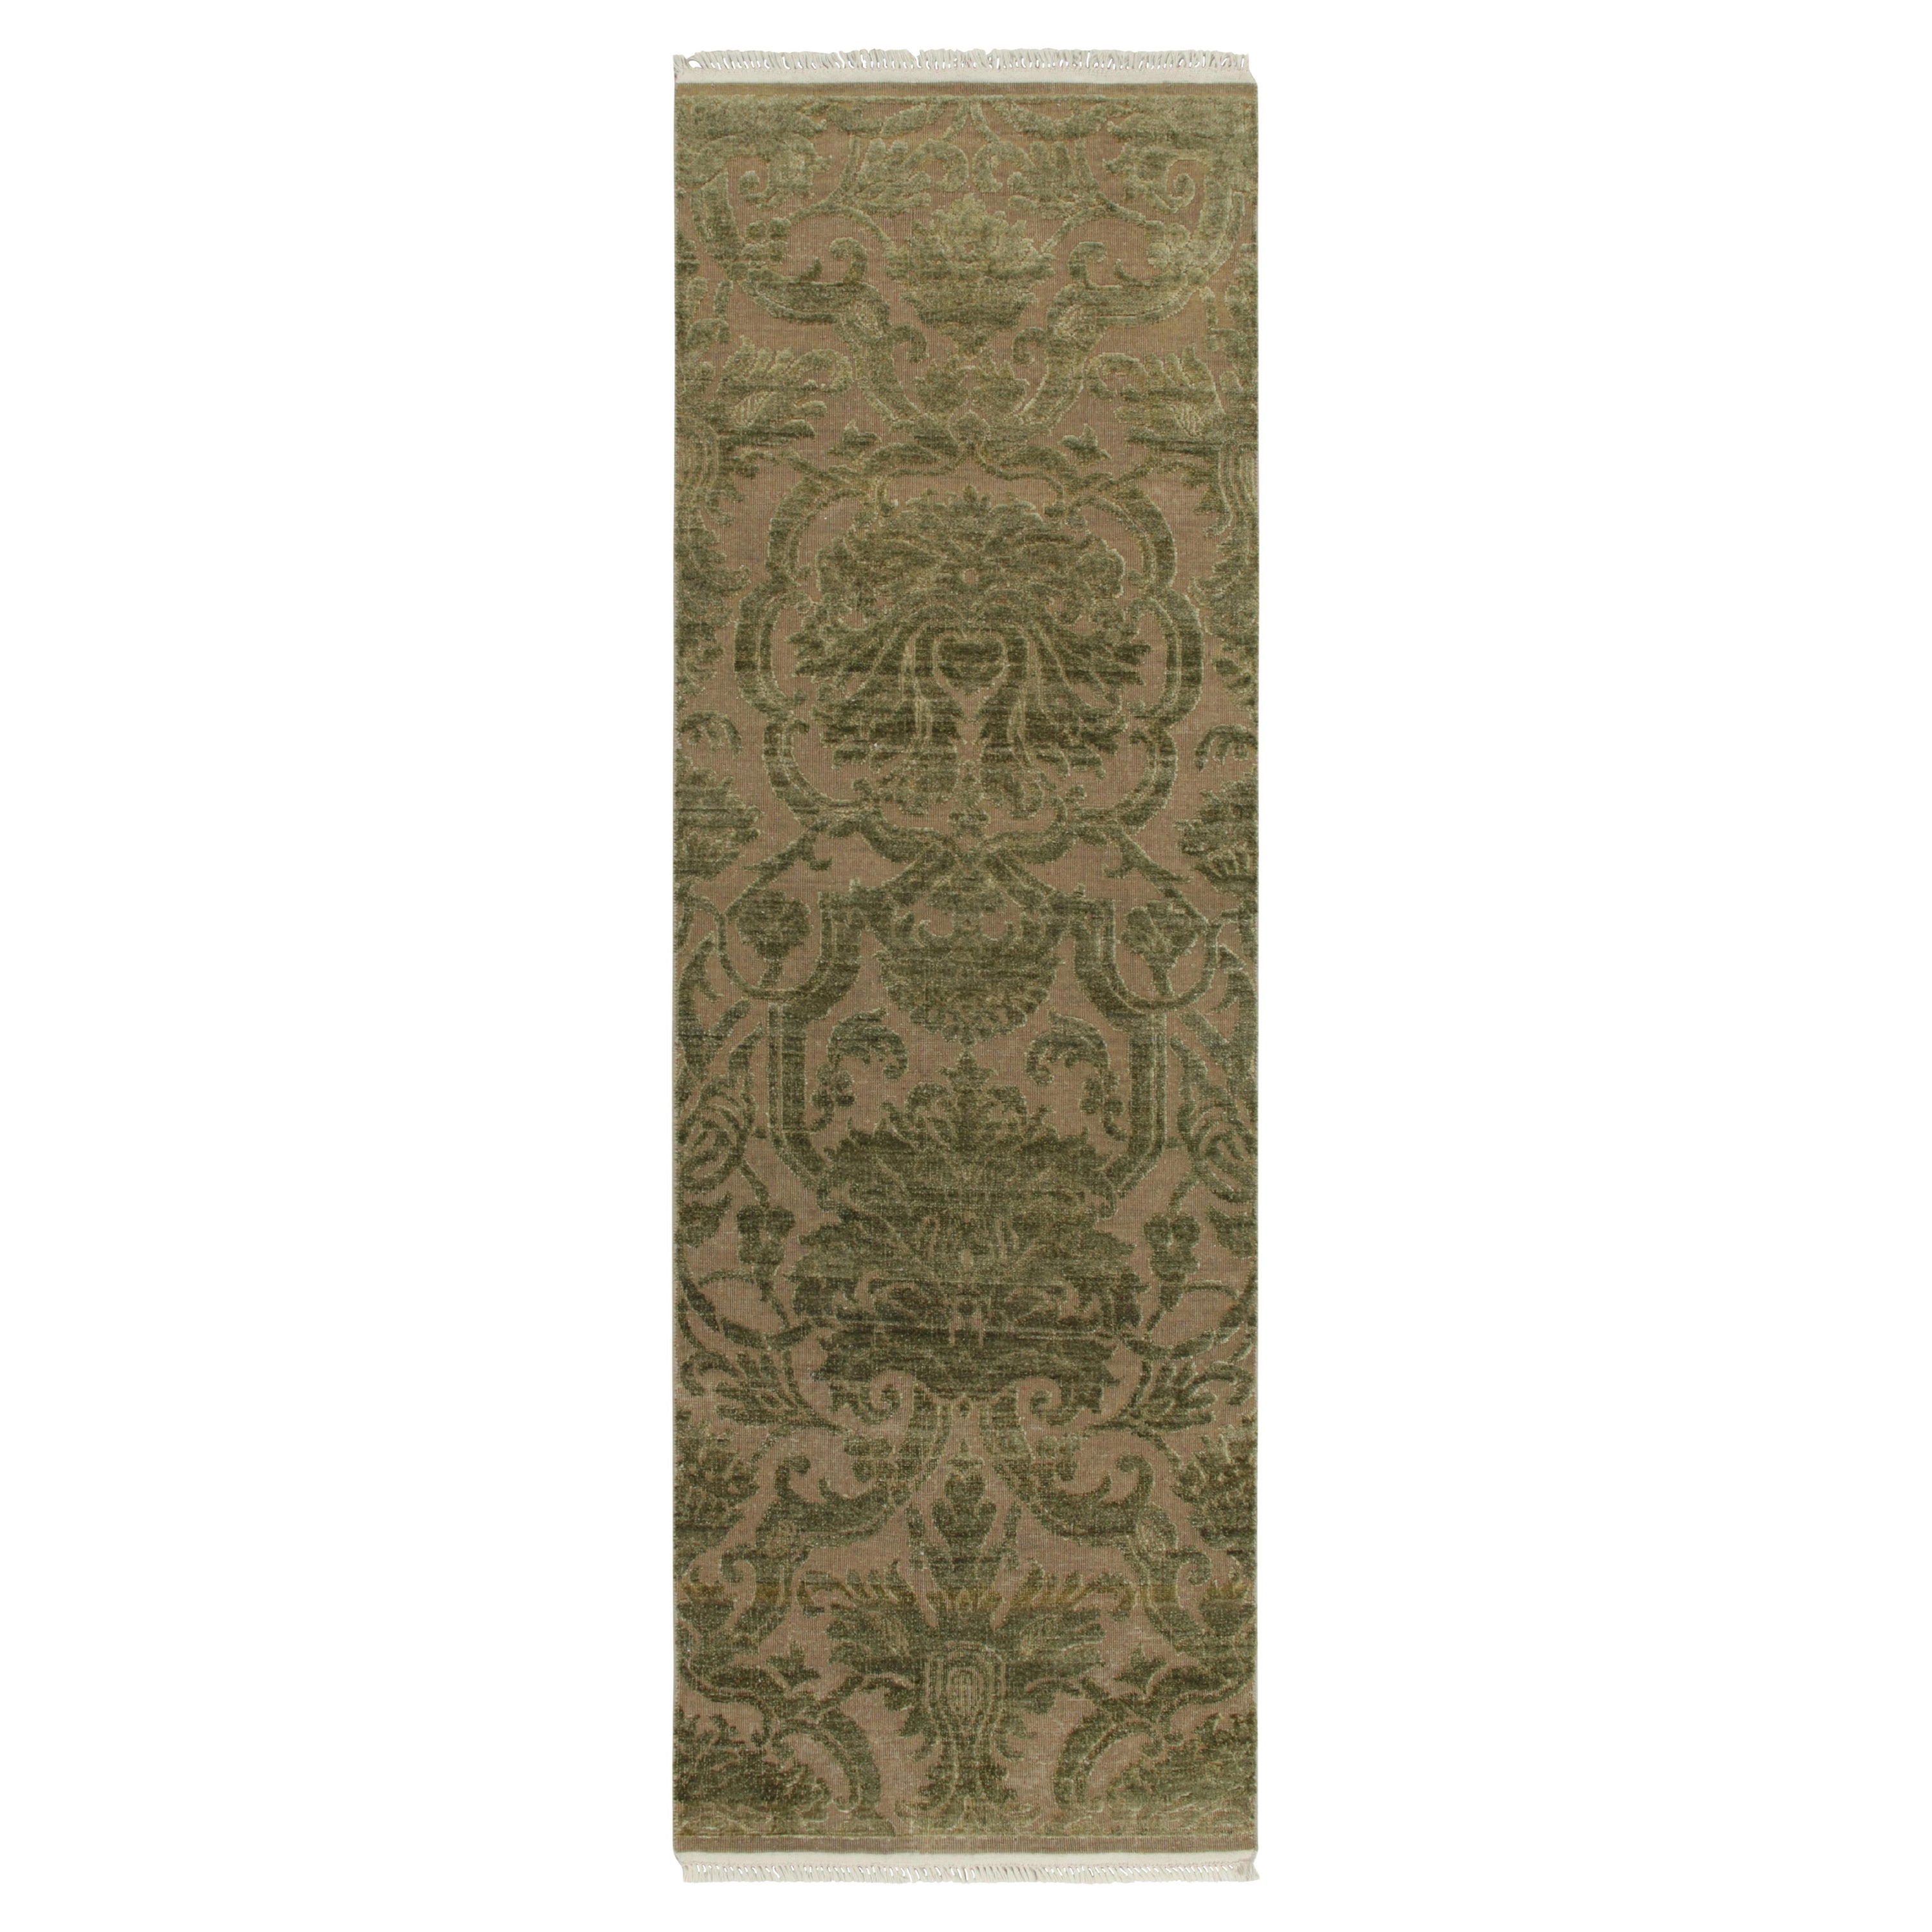 Rug & Kilim’s European Style Runner in Beige with Green Floral Patterns